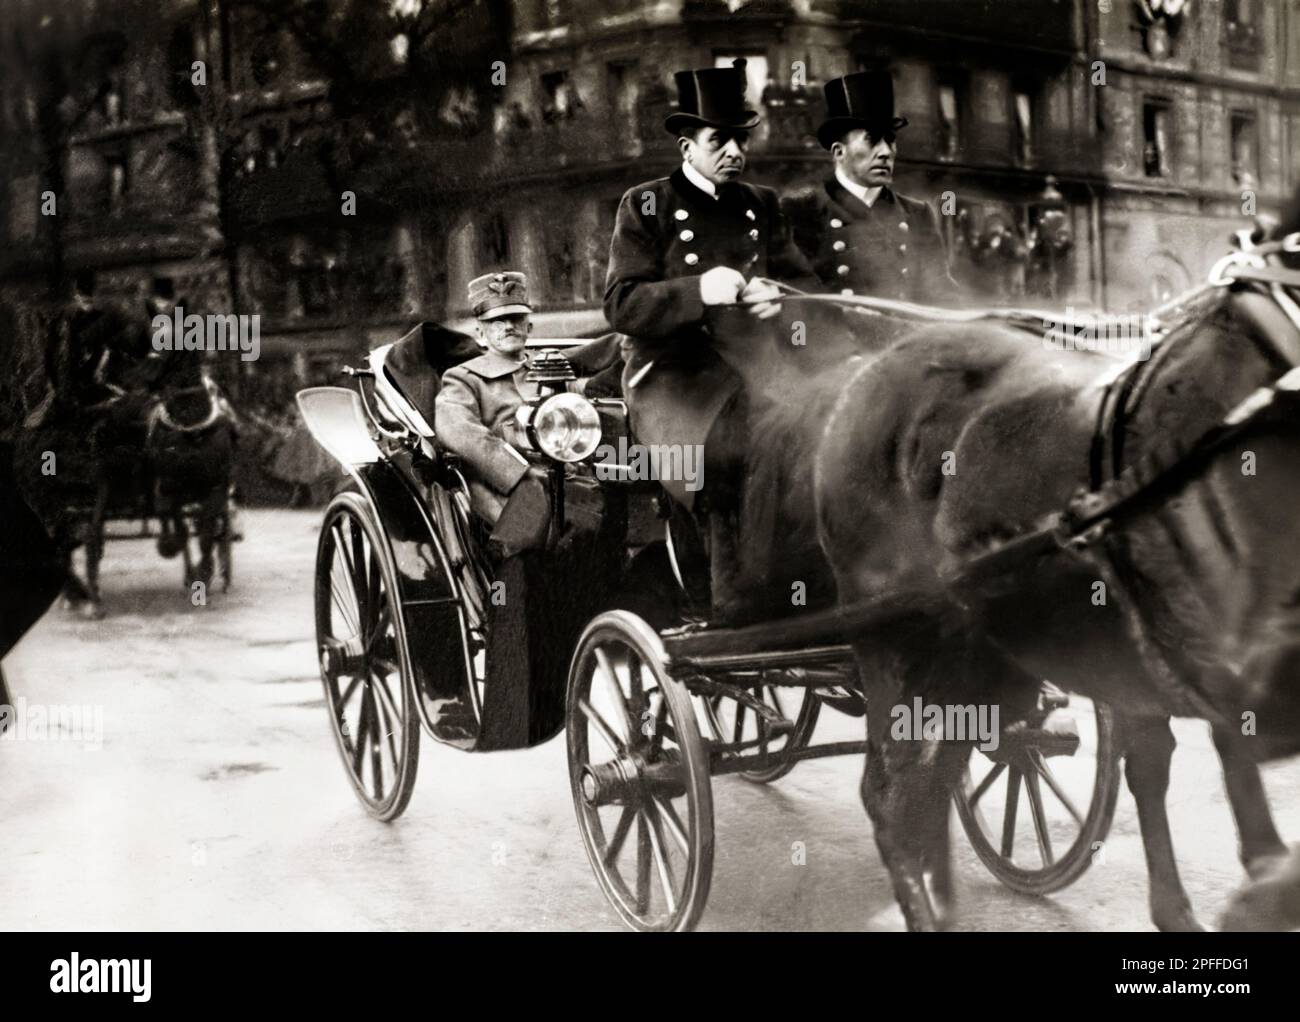 The King of Italy Victor-Emmanuel III (Vittorio Emanuele III) in December 1918, when he came to Paris. Great War, First World War, 1914-1918 Stock Photo